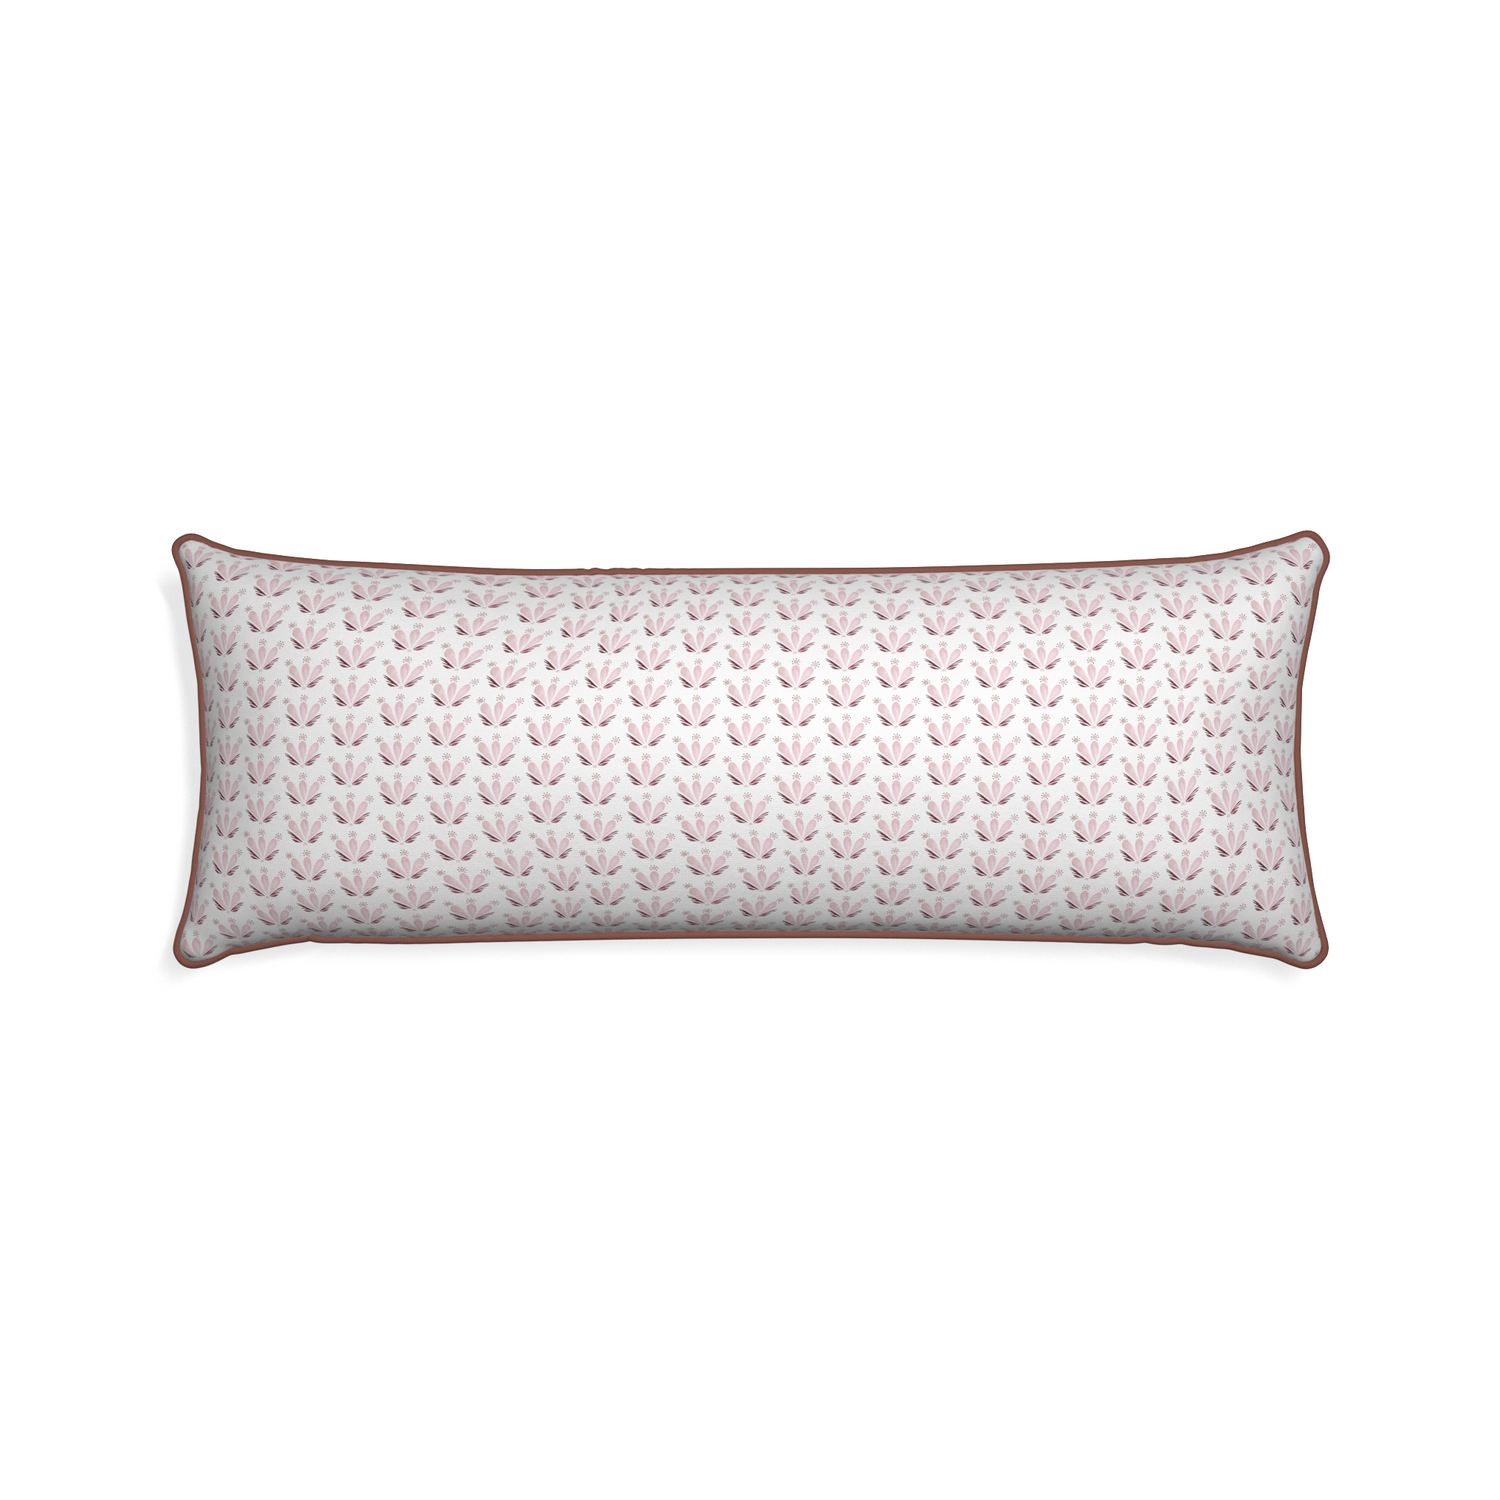 Xl-lumbar serena pink custom pillow with w piping on white background